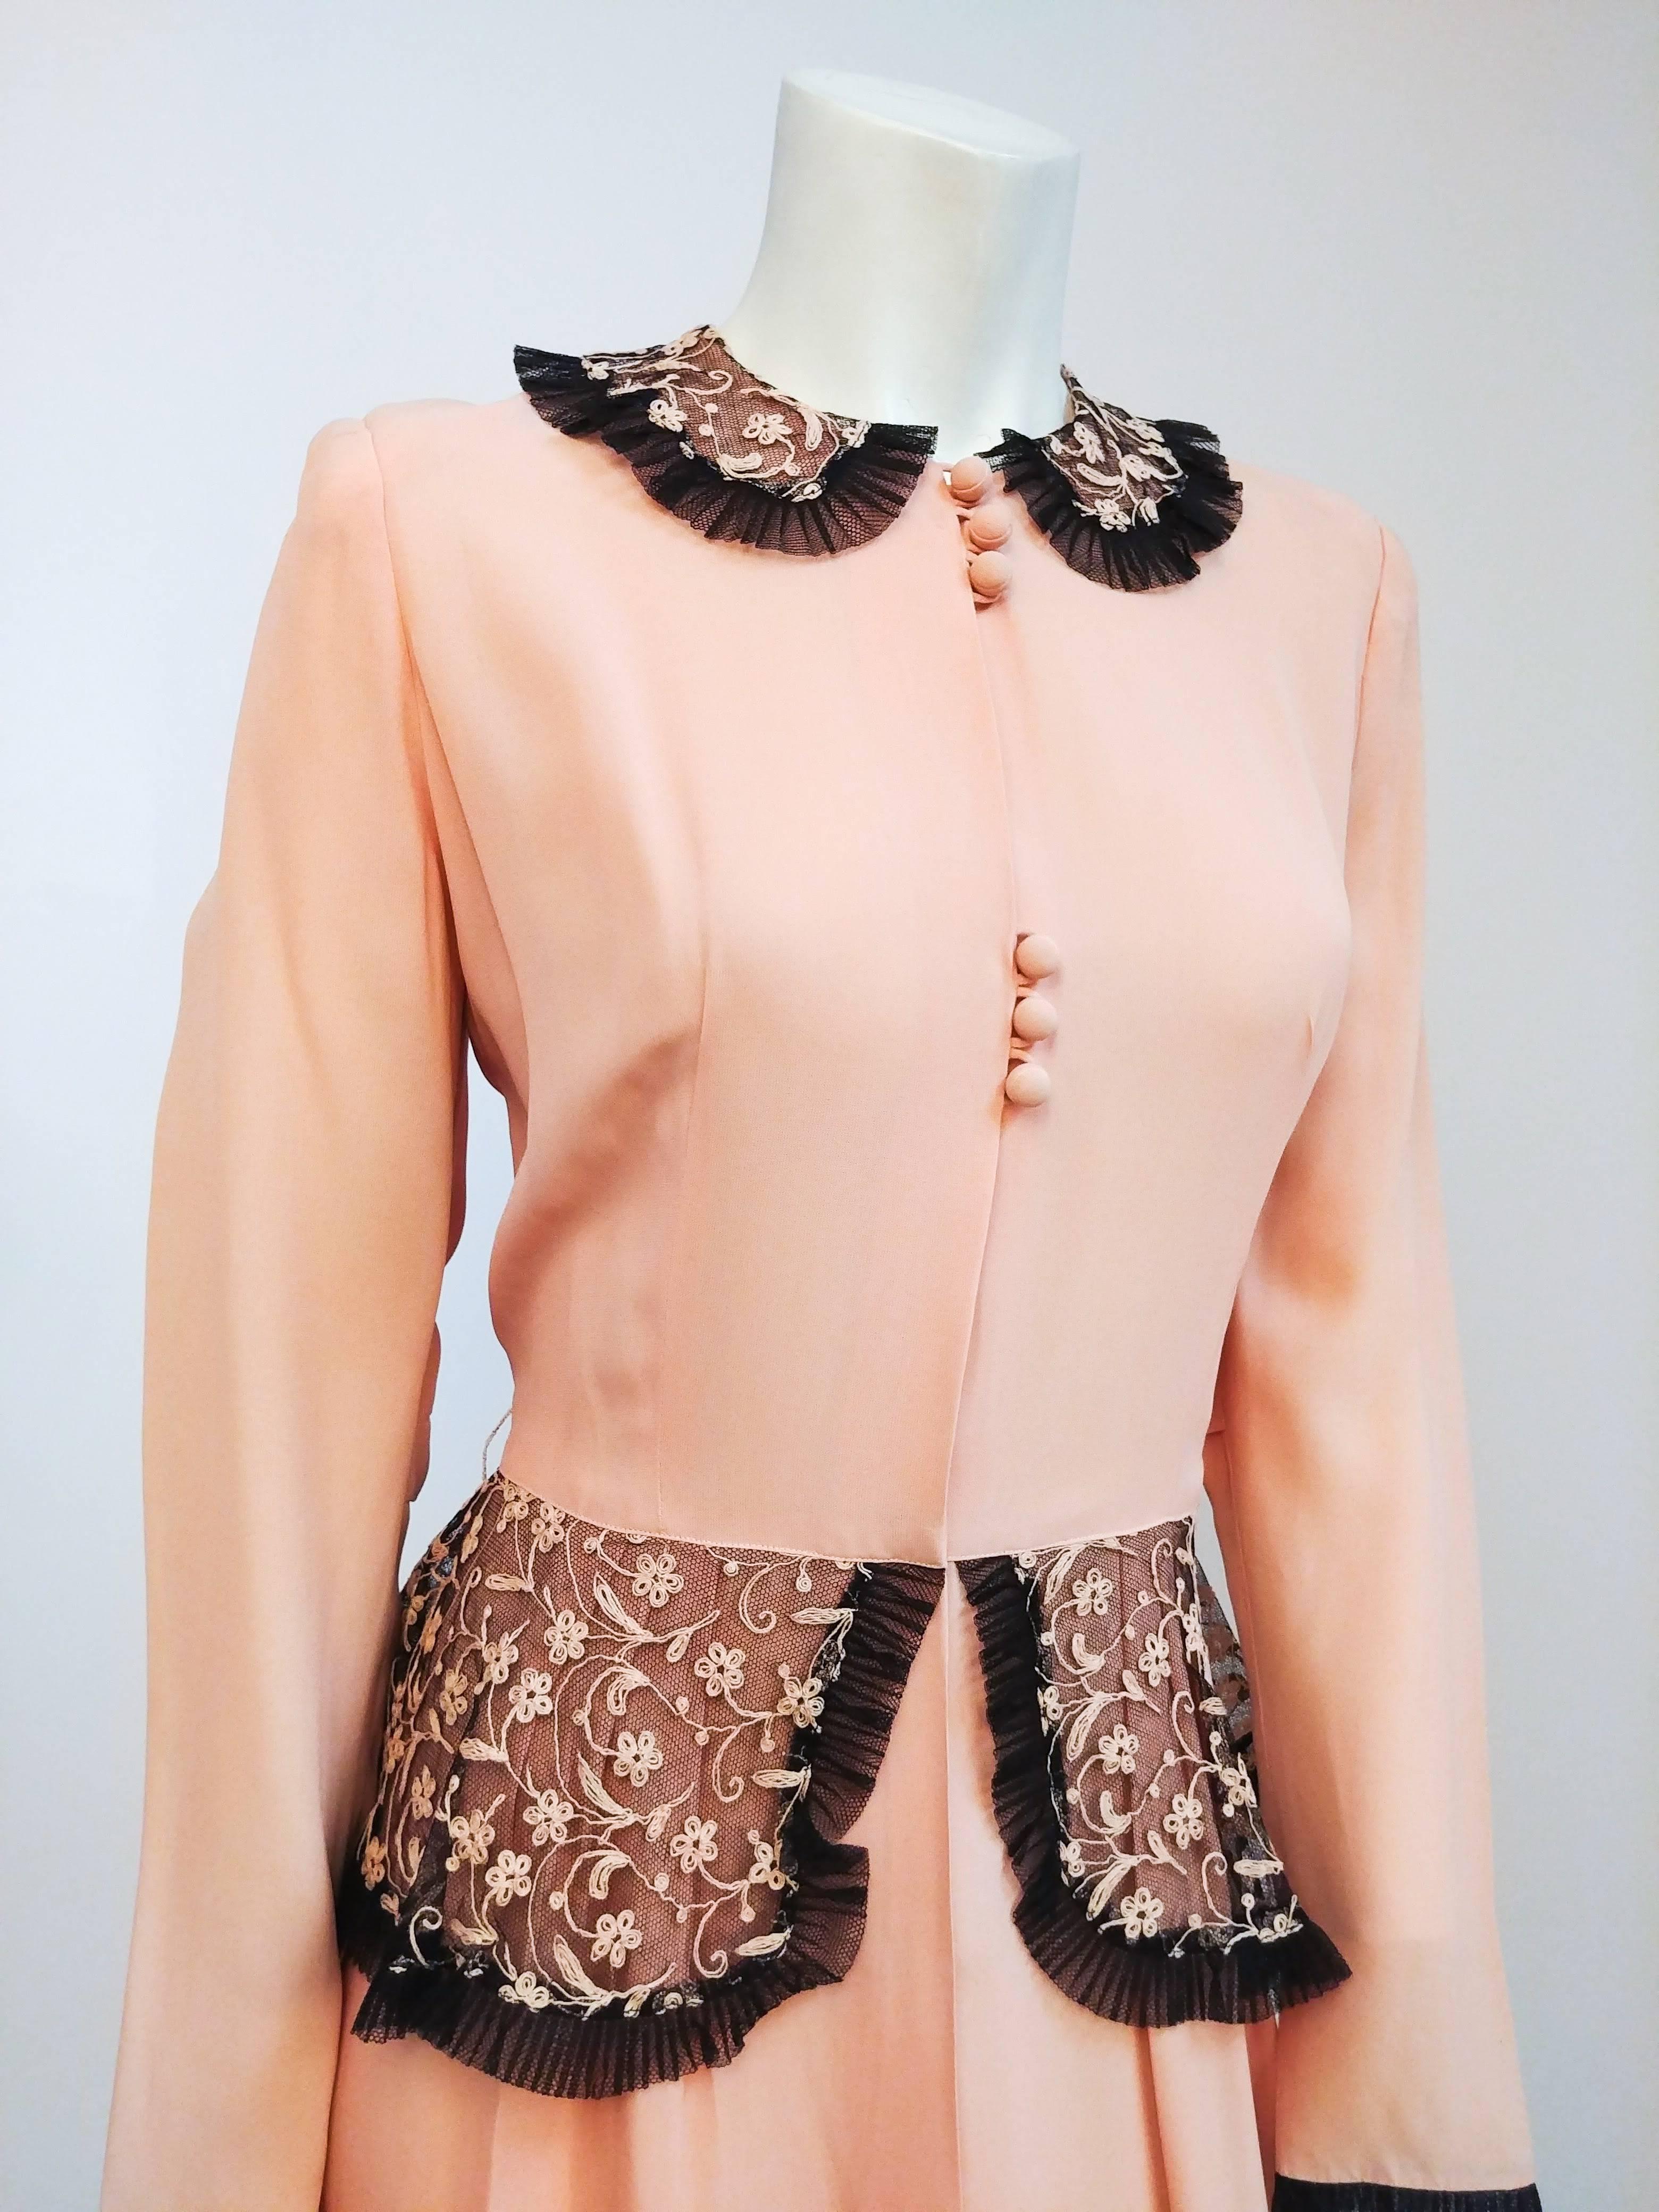 1940s Petal Pink Black Lace Peplum Dress. Full-length 1940's evening dress with embroidered lace collar, cuffs, and peplum. Button-front closure. Magazine with original advertisement included.